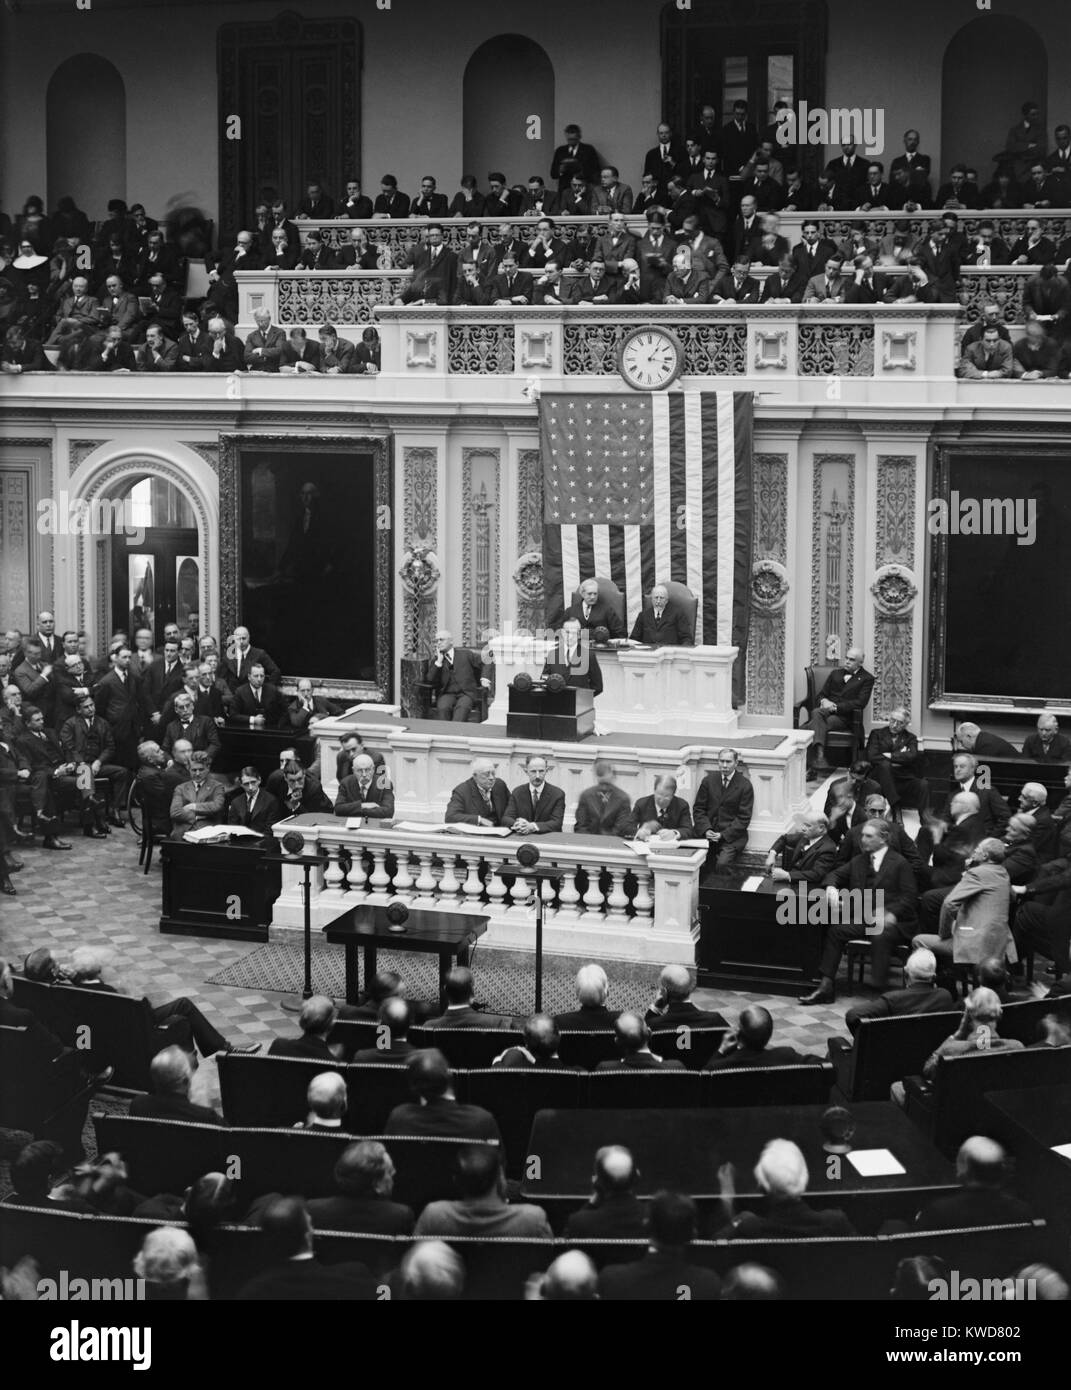 President Calvin Coolidge delivering his first message to Congress on Dec. 6, 1923. He assumed the Presidency following the death of Warren Harding on August 2, 1923. (BSLOC 2015 16 23) Stock Photo